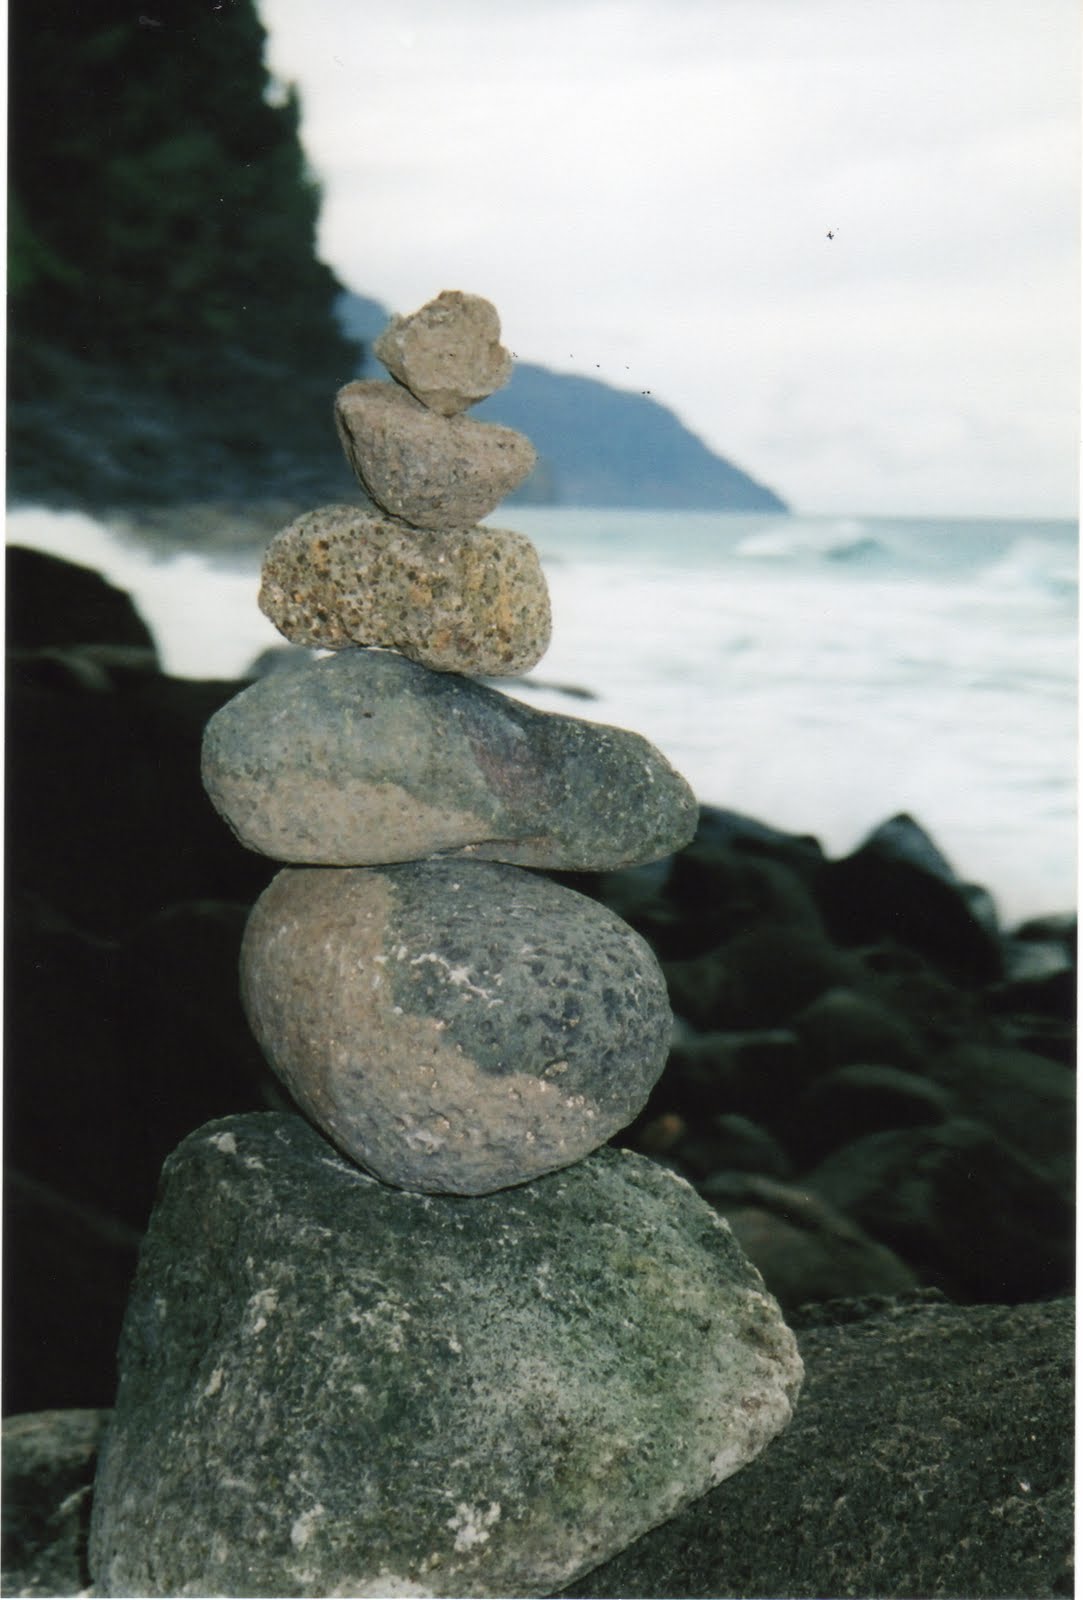 Sharon's Souvenirs: The story of stacked rocks continues